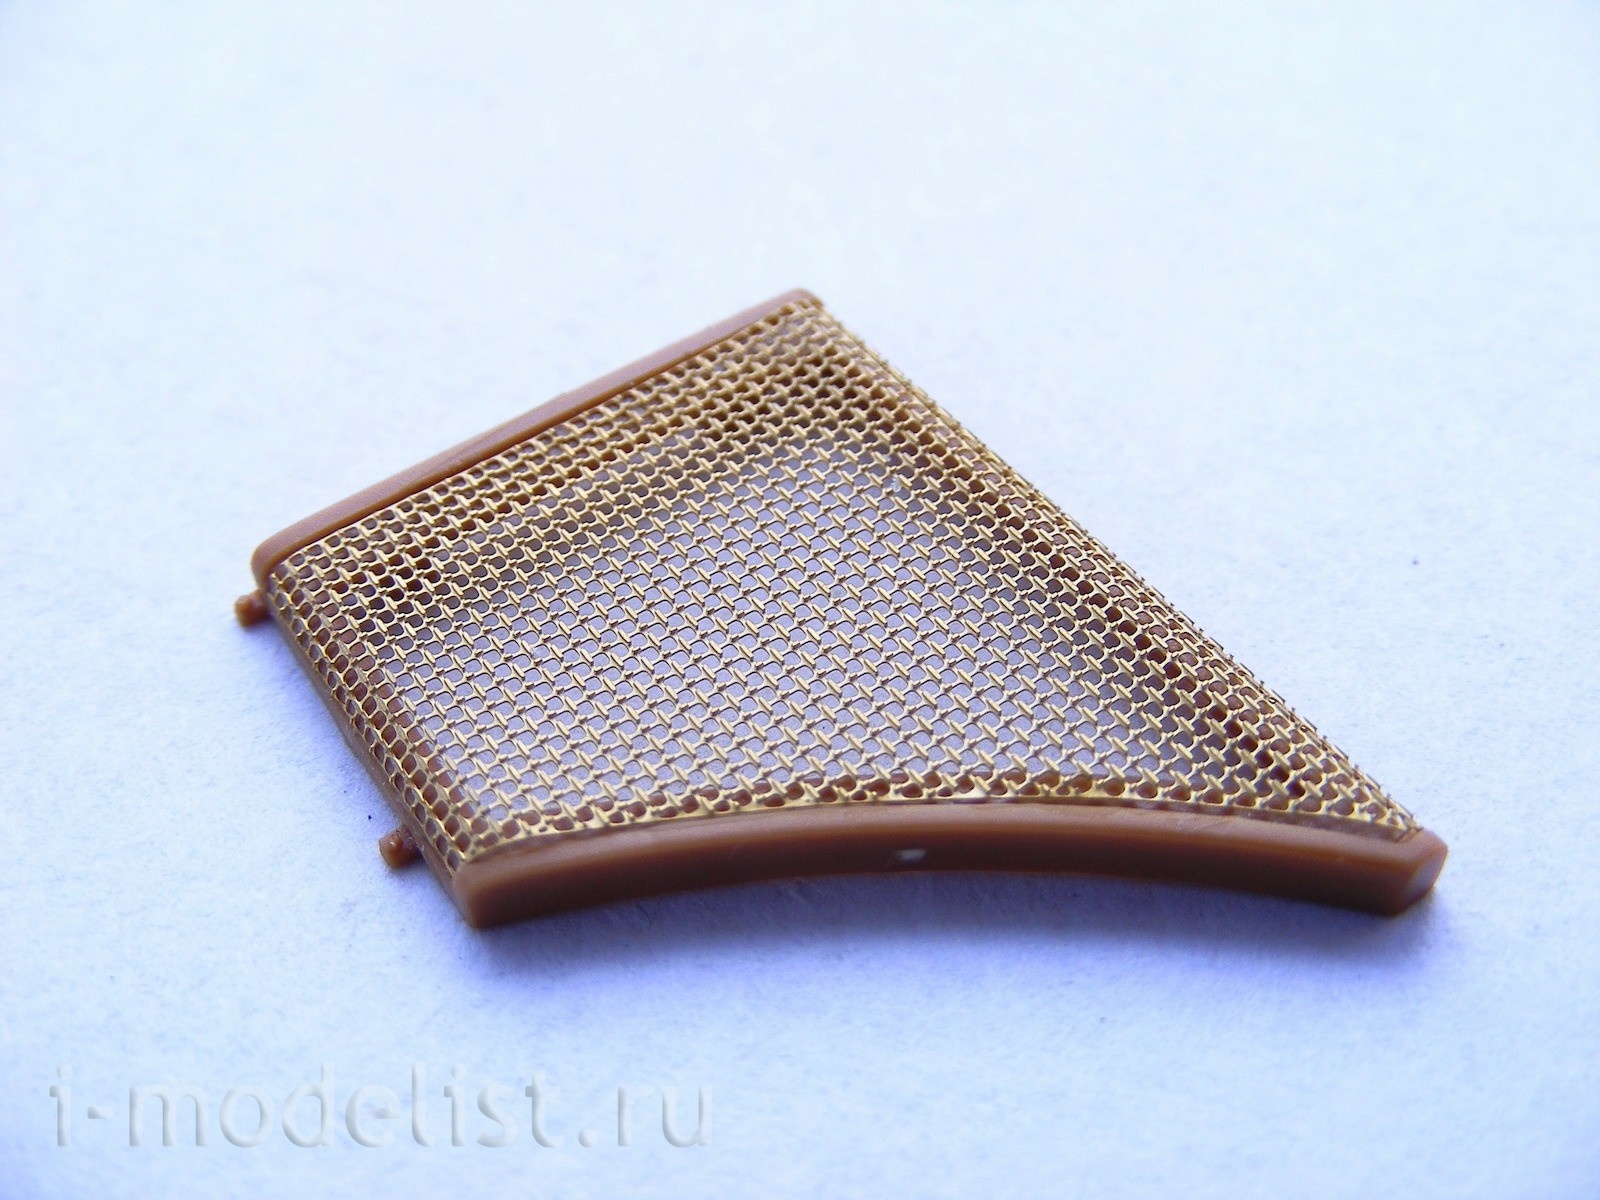 035244 Microdesign Mesh for 1/35 king Tiger from the Zvezda